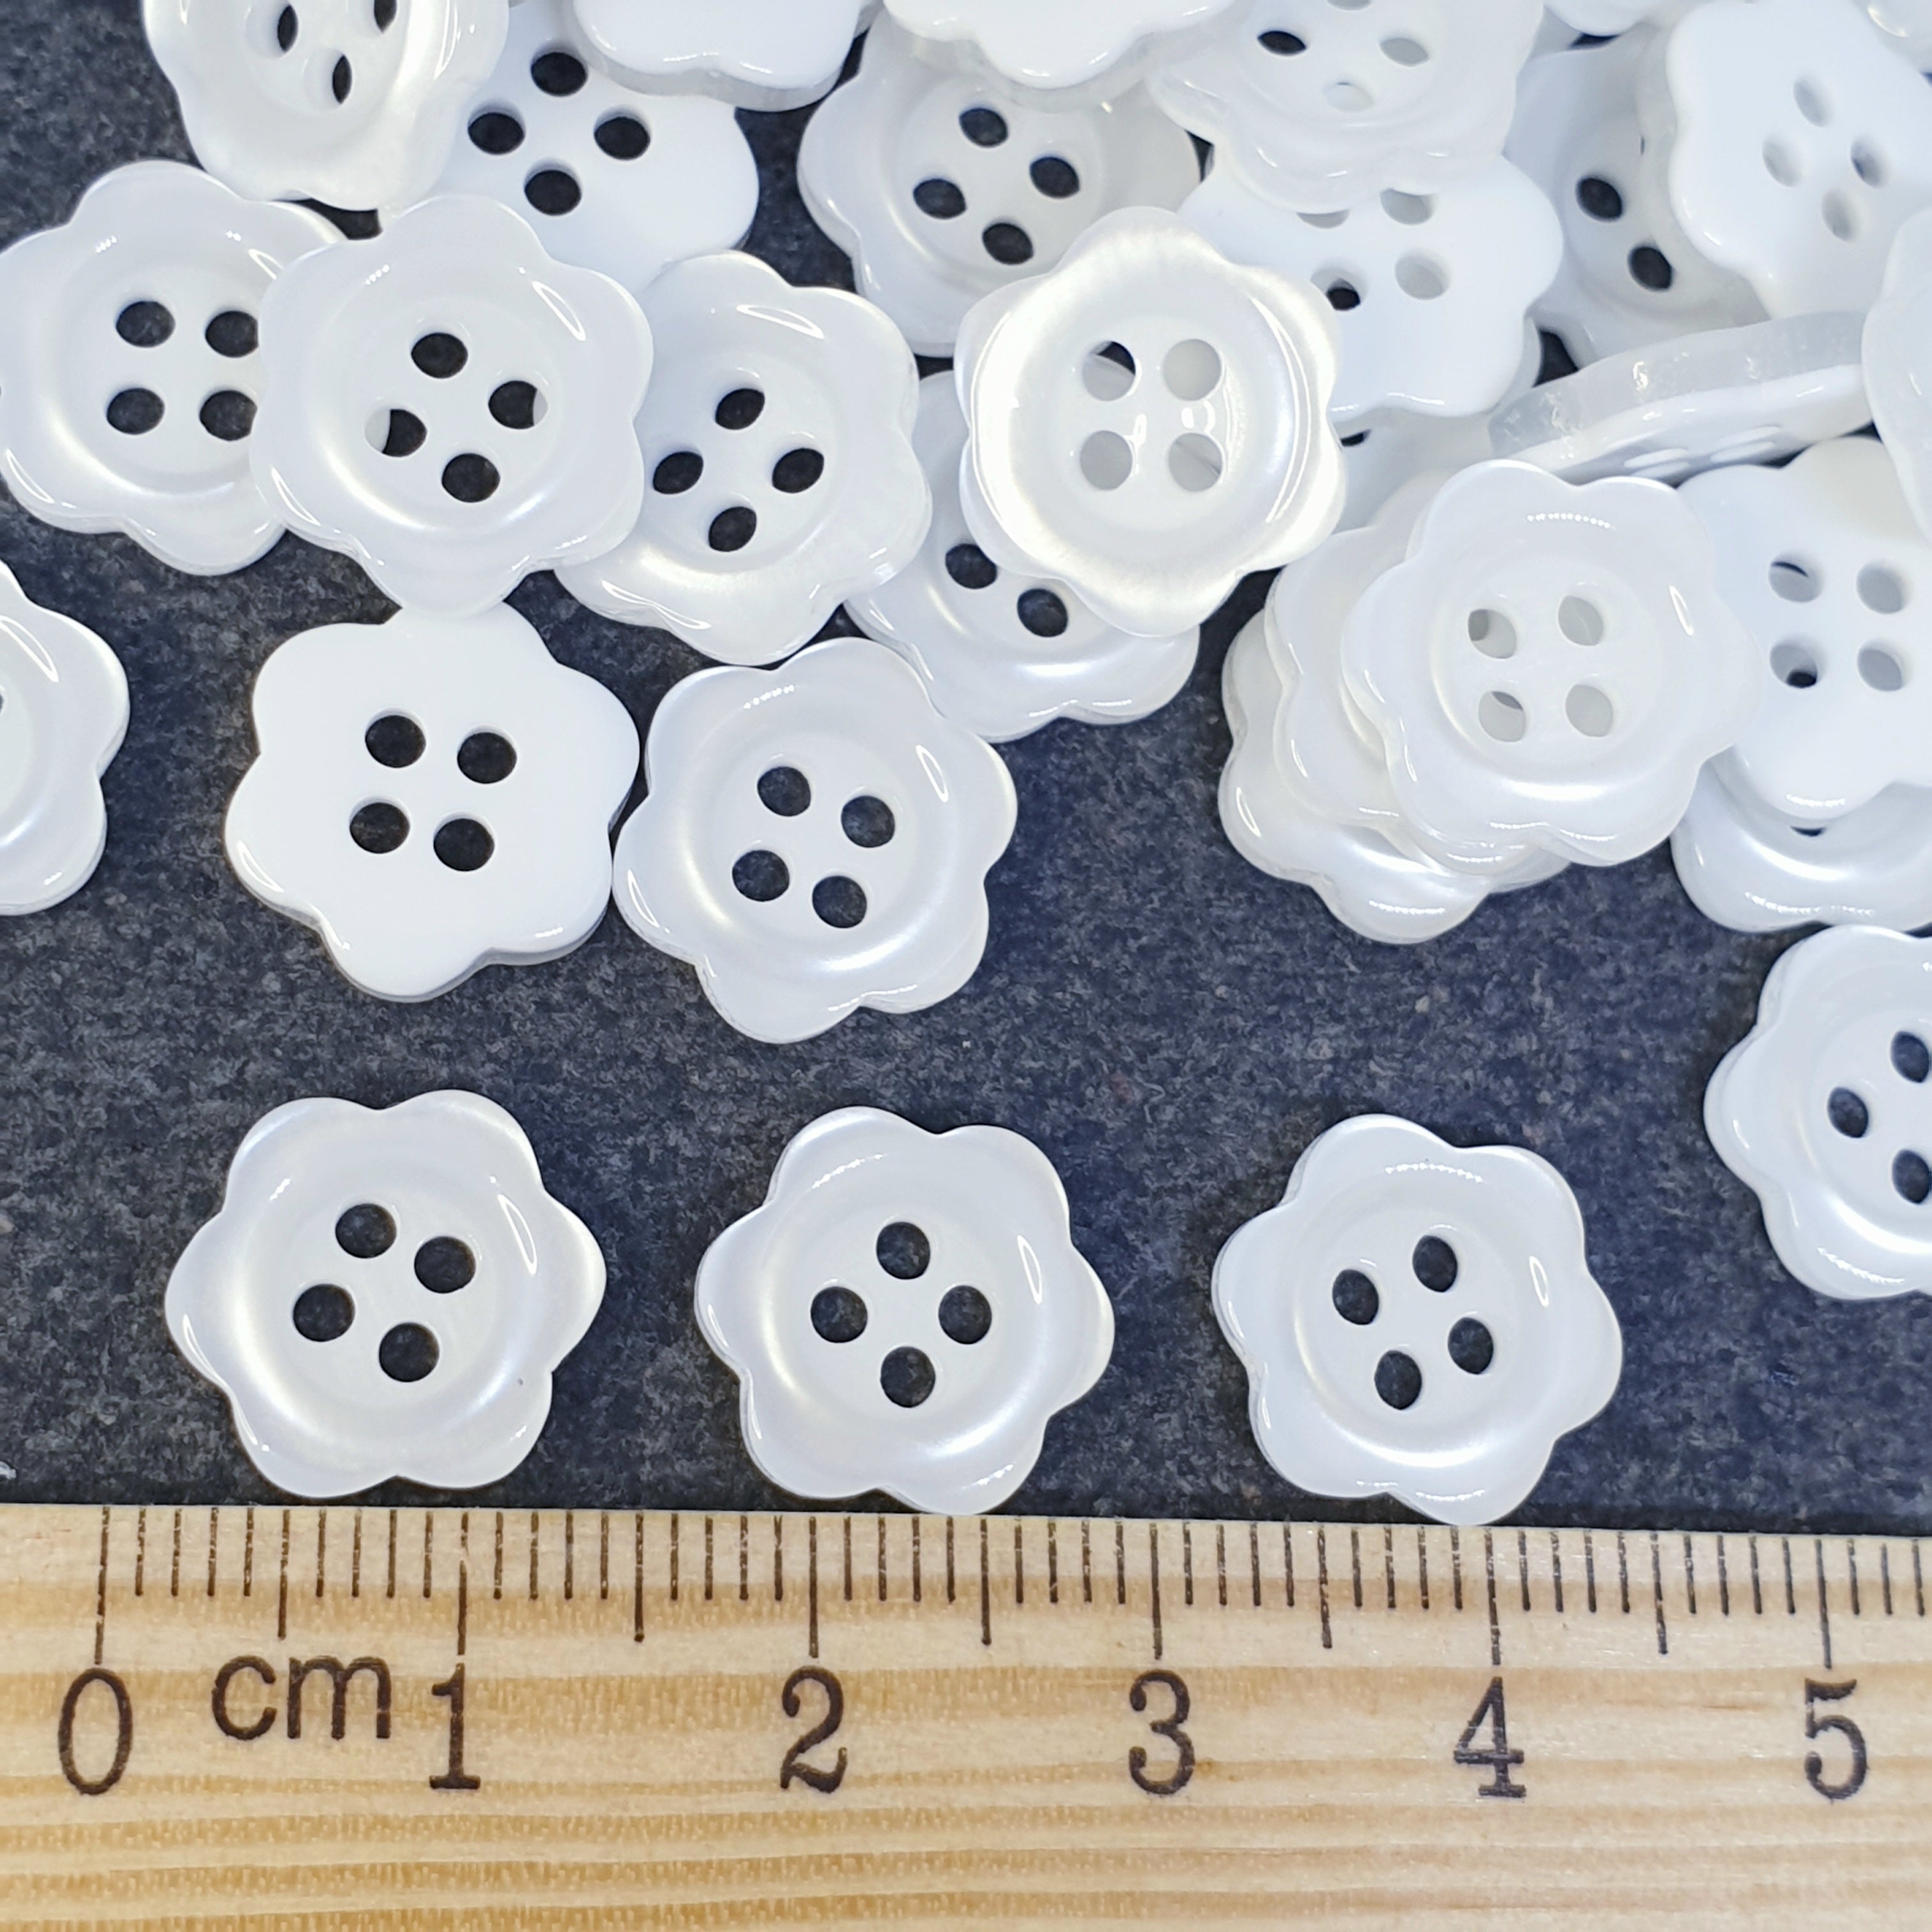 MajorCrafts 40pcs 12.5mm White Pearlescent Flower Shaped 4 Holes Small Resin Sewing Buttons